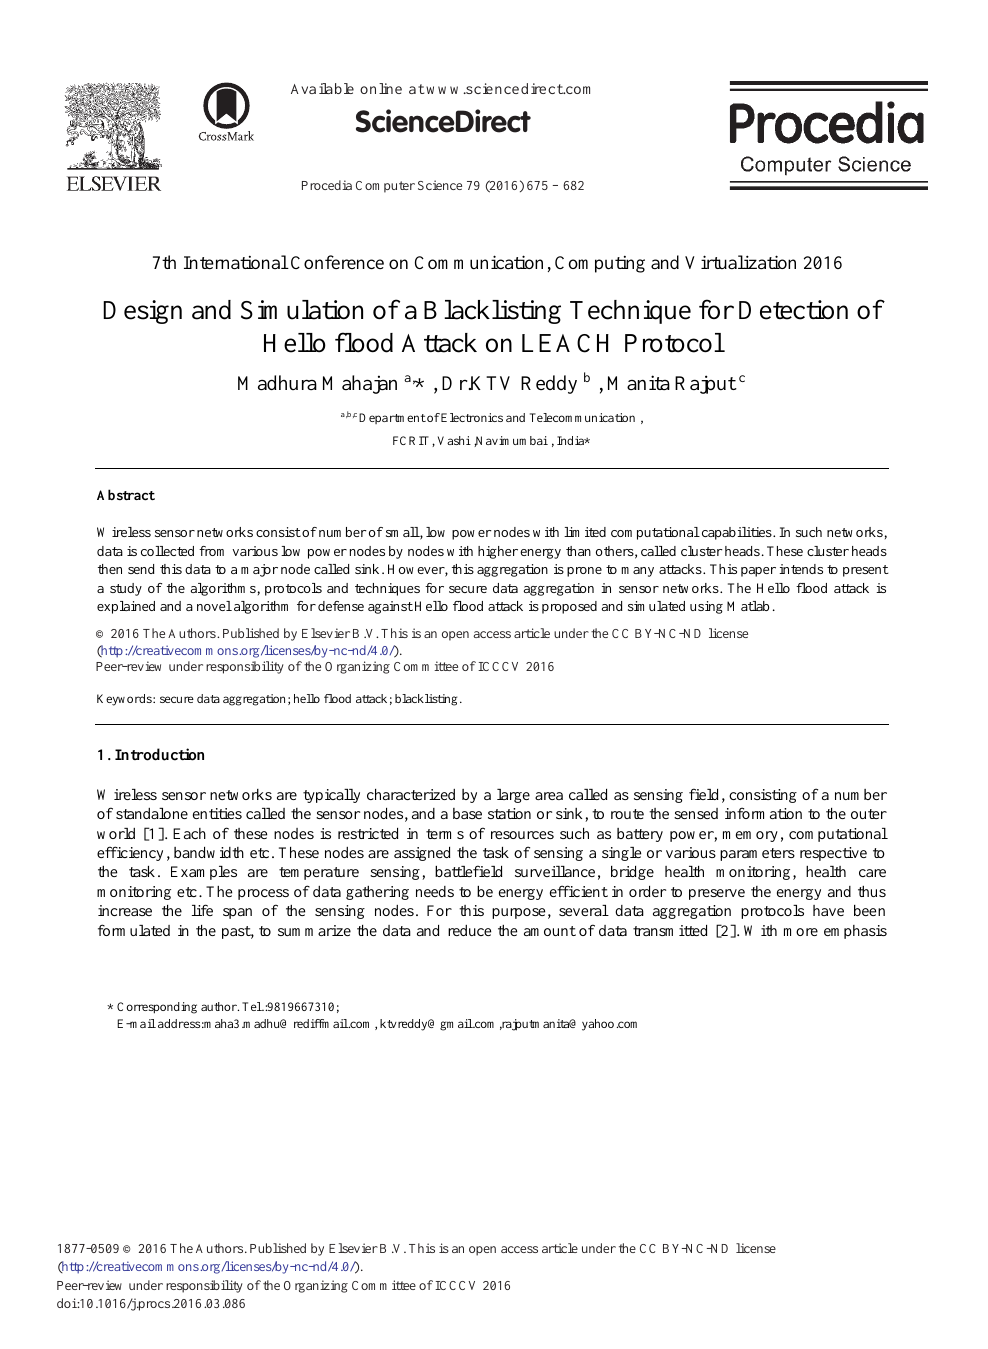 Design And Simulation Of A Blacklisting Technique For Detection Of Hello Flood Attack On Leach Protocol Topic Of Research Paper In Computer And Information Sciences Download Scholarly Article Pdf And Read